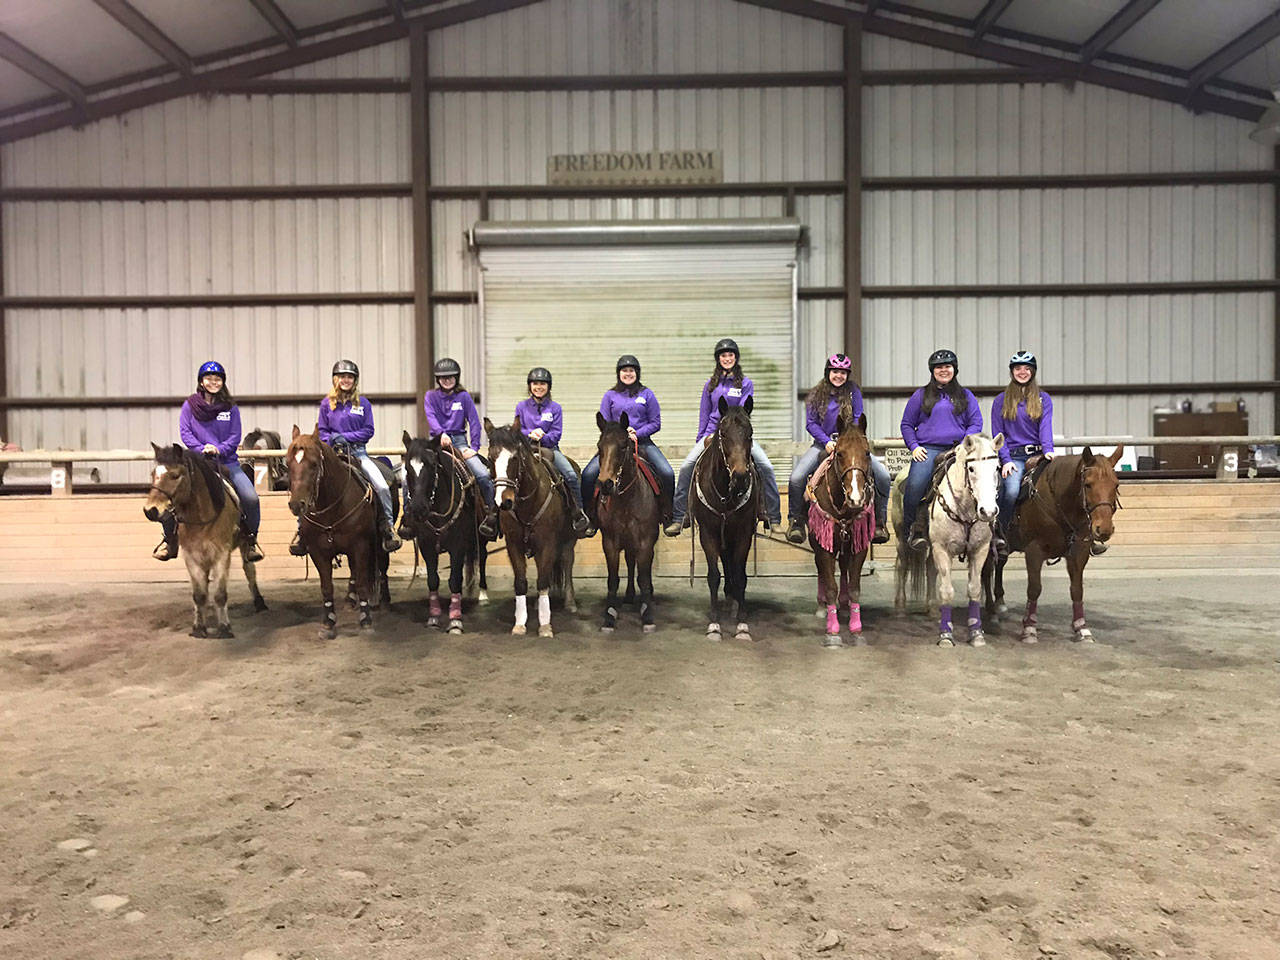 Sequim High School’s Washington State High School Equestrian Team prepares for their competition meets weekly at Freedom Farm’s indoor arena. Farm owners Mary Gallagher and Jerry Schmidt generously offer an evening to practice inside to the Port Angeles team, too. The Sequim team, from left, are Khelea Cloetens, Grace Niemeyer, Keri Tucker, Miranda Williams, Abby Garcia, Yana Hoesel, Abbi Priest, Lilly Thomas and Chloe VanProyen. (Katie Newton)